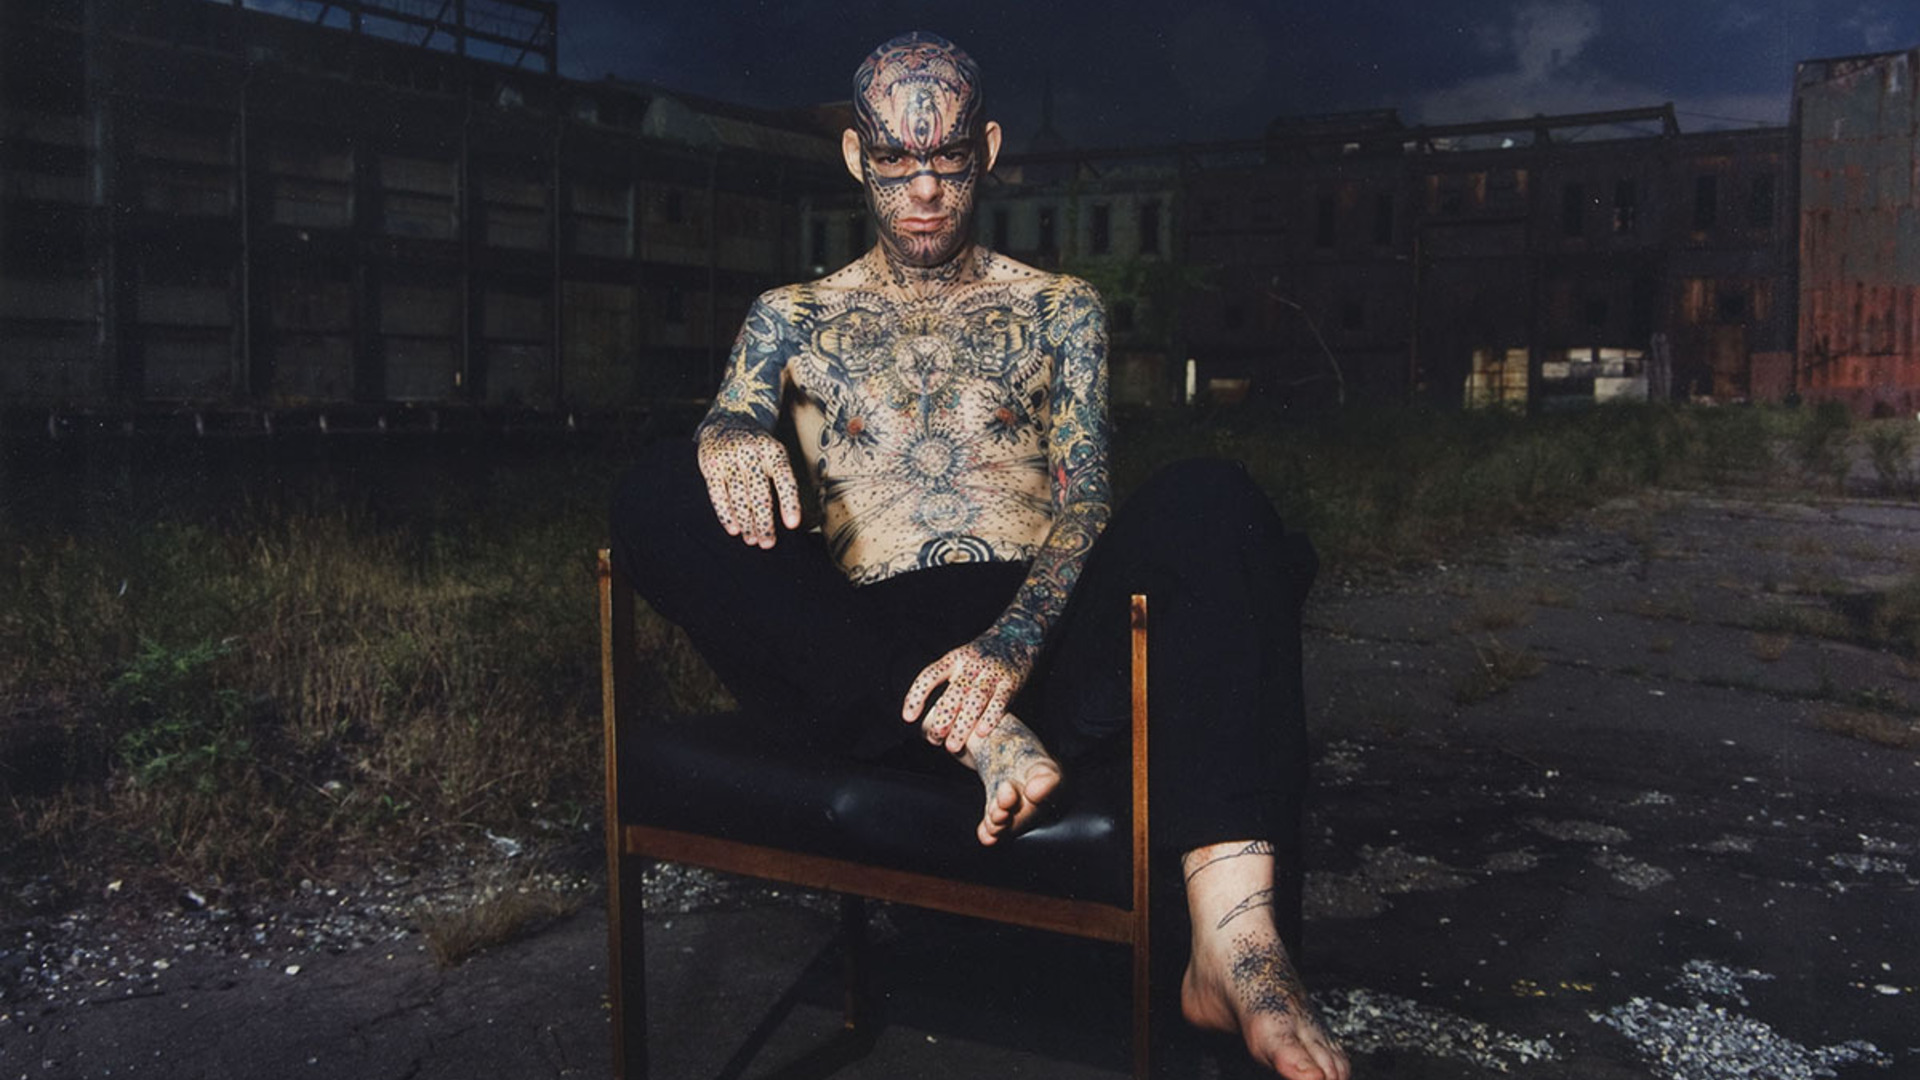 Jeff T. Crisman (American, b. 1952), “Tattoo” Mike Wilson, New York City, 1991, chromogenic print. Acquired with funds provided by the Walter R. Beardsley Endowment for Contemporary Art, 2009.004.008